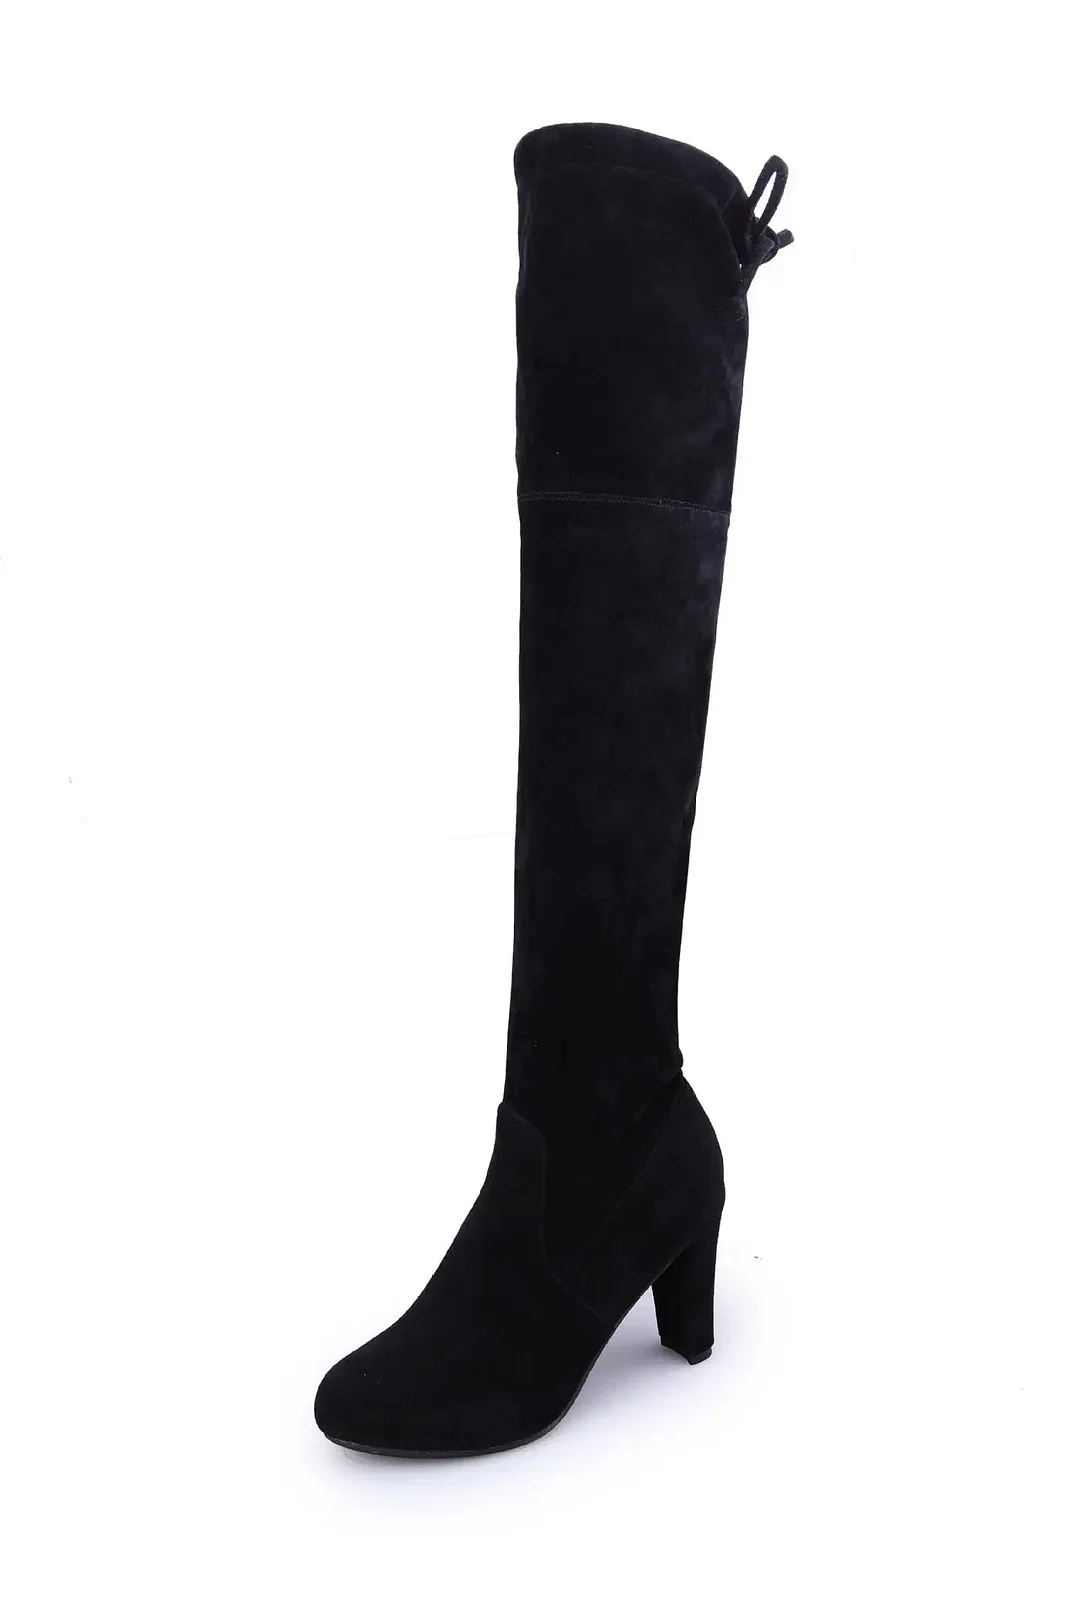 Vstacam 2022 New Faux Suede Slim Boots Sexy Over The Knee High Women Fashion Winter Thigh High Boots Shoes Woman Fashion Botas Mujer